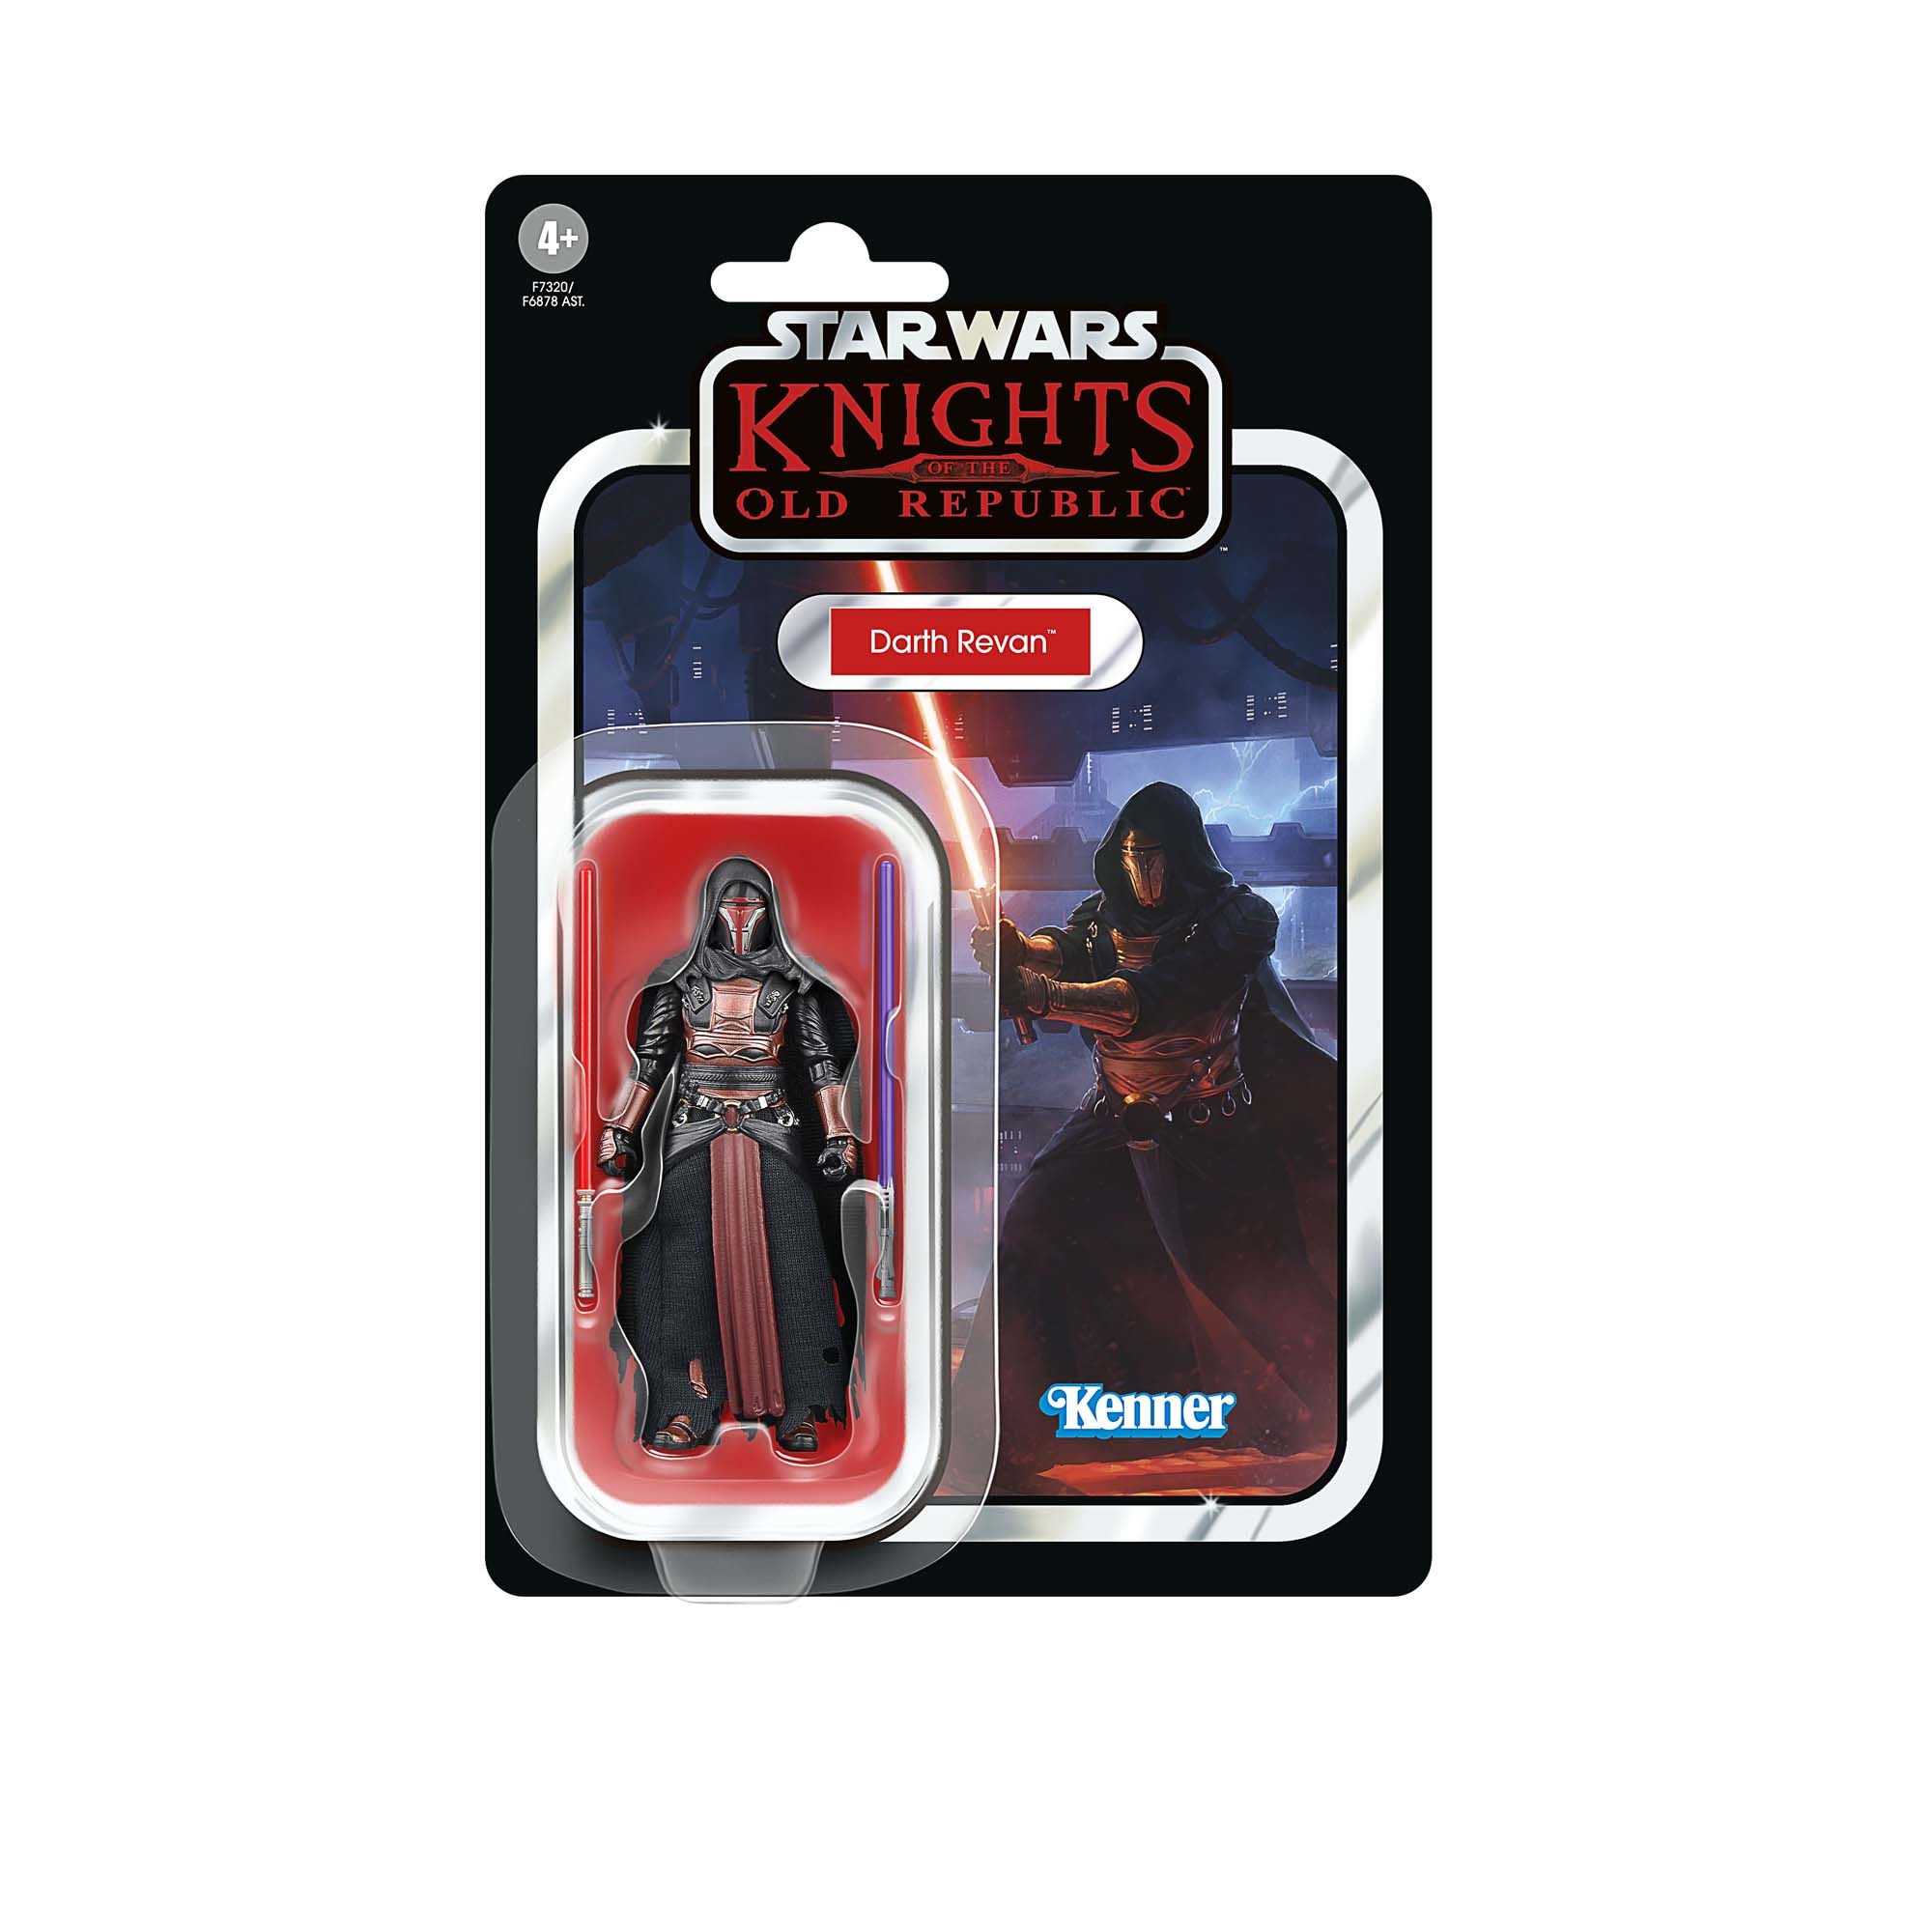 Star Wars Miniatures Knights Of The Old Republic Booster New Sealed KOTOR  2008 653569253037